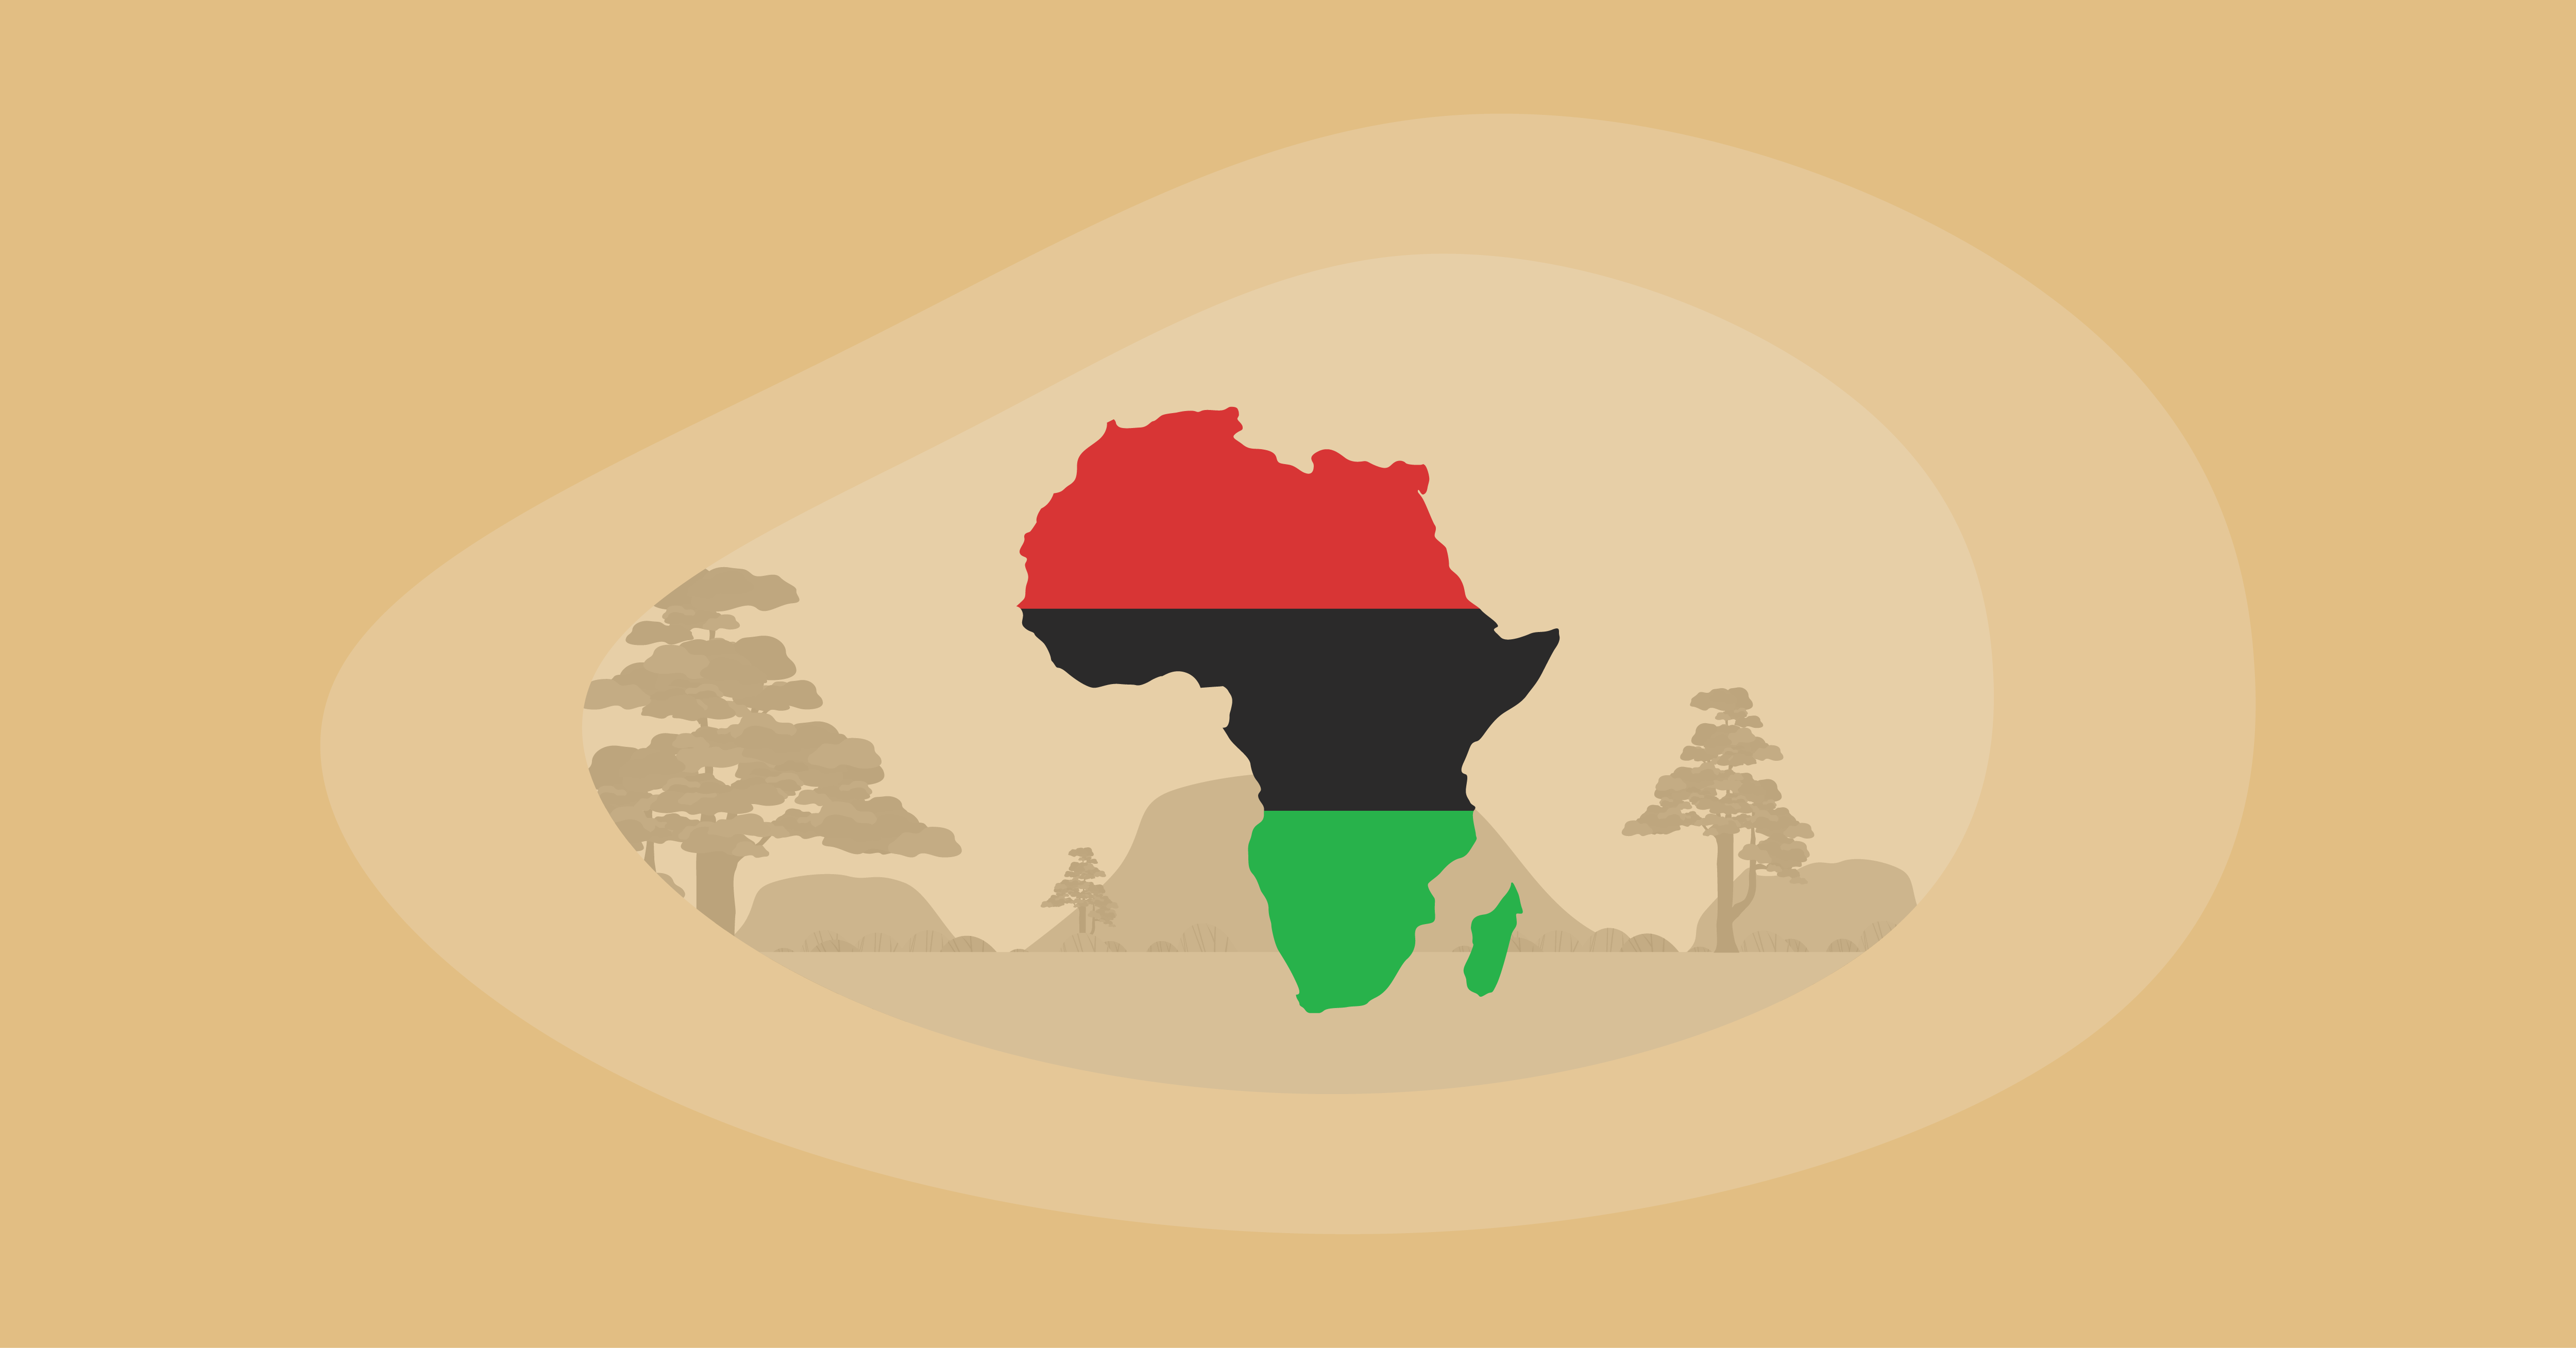 Illustration of the African continent